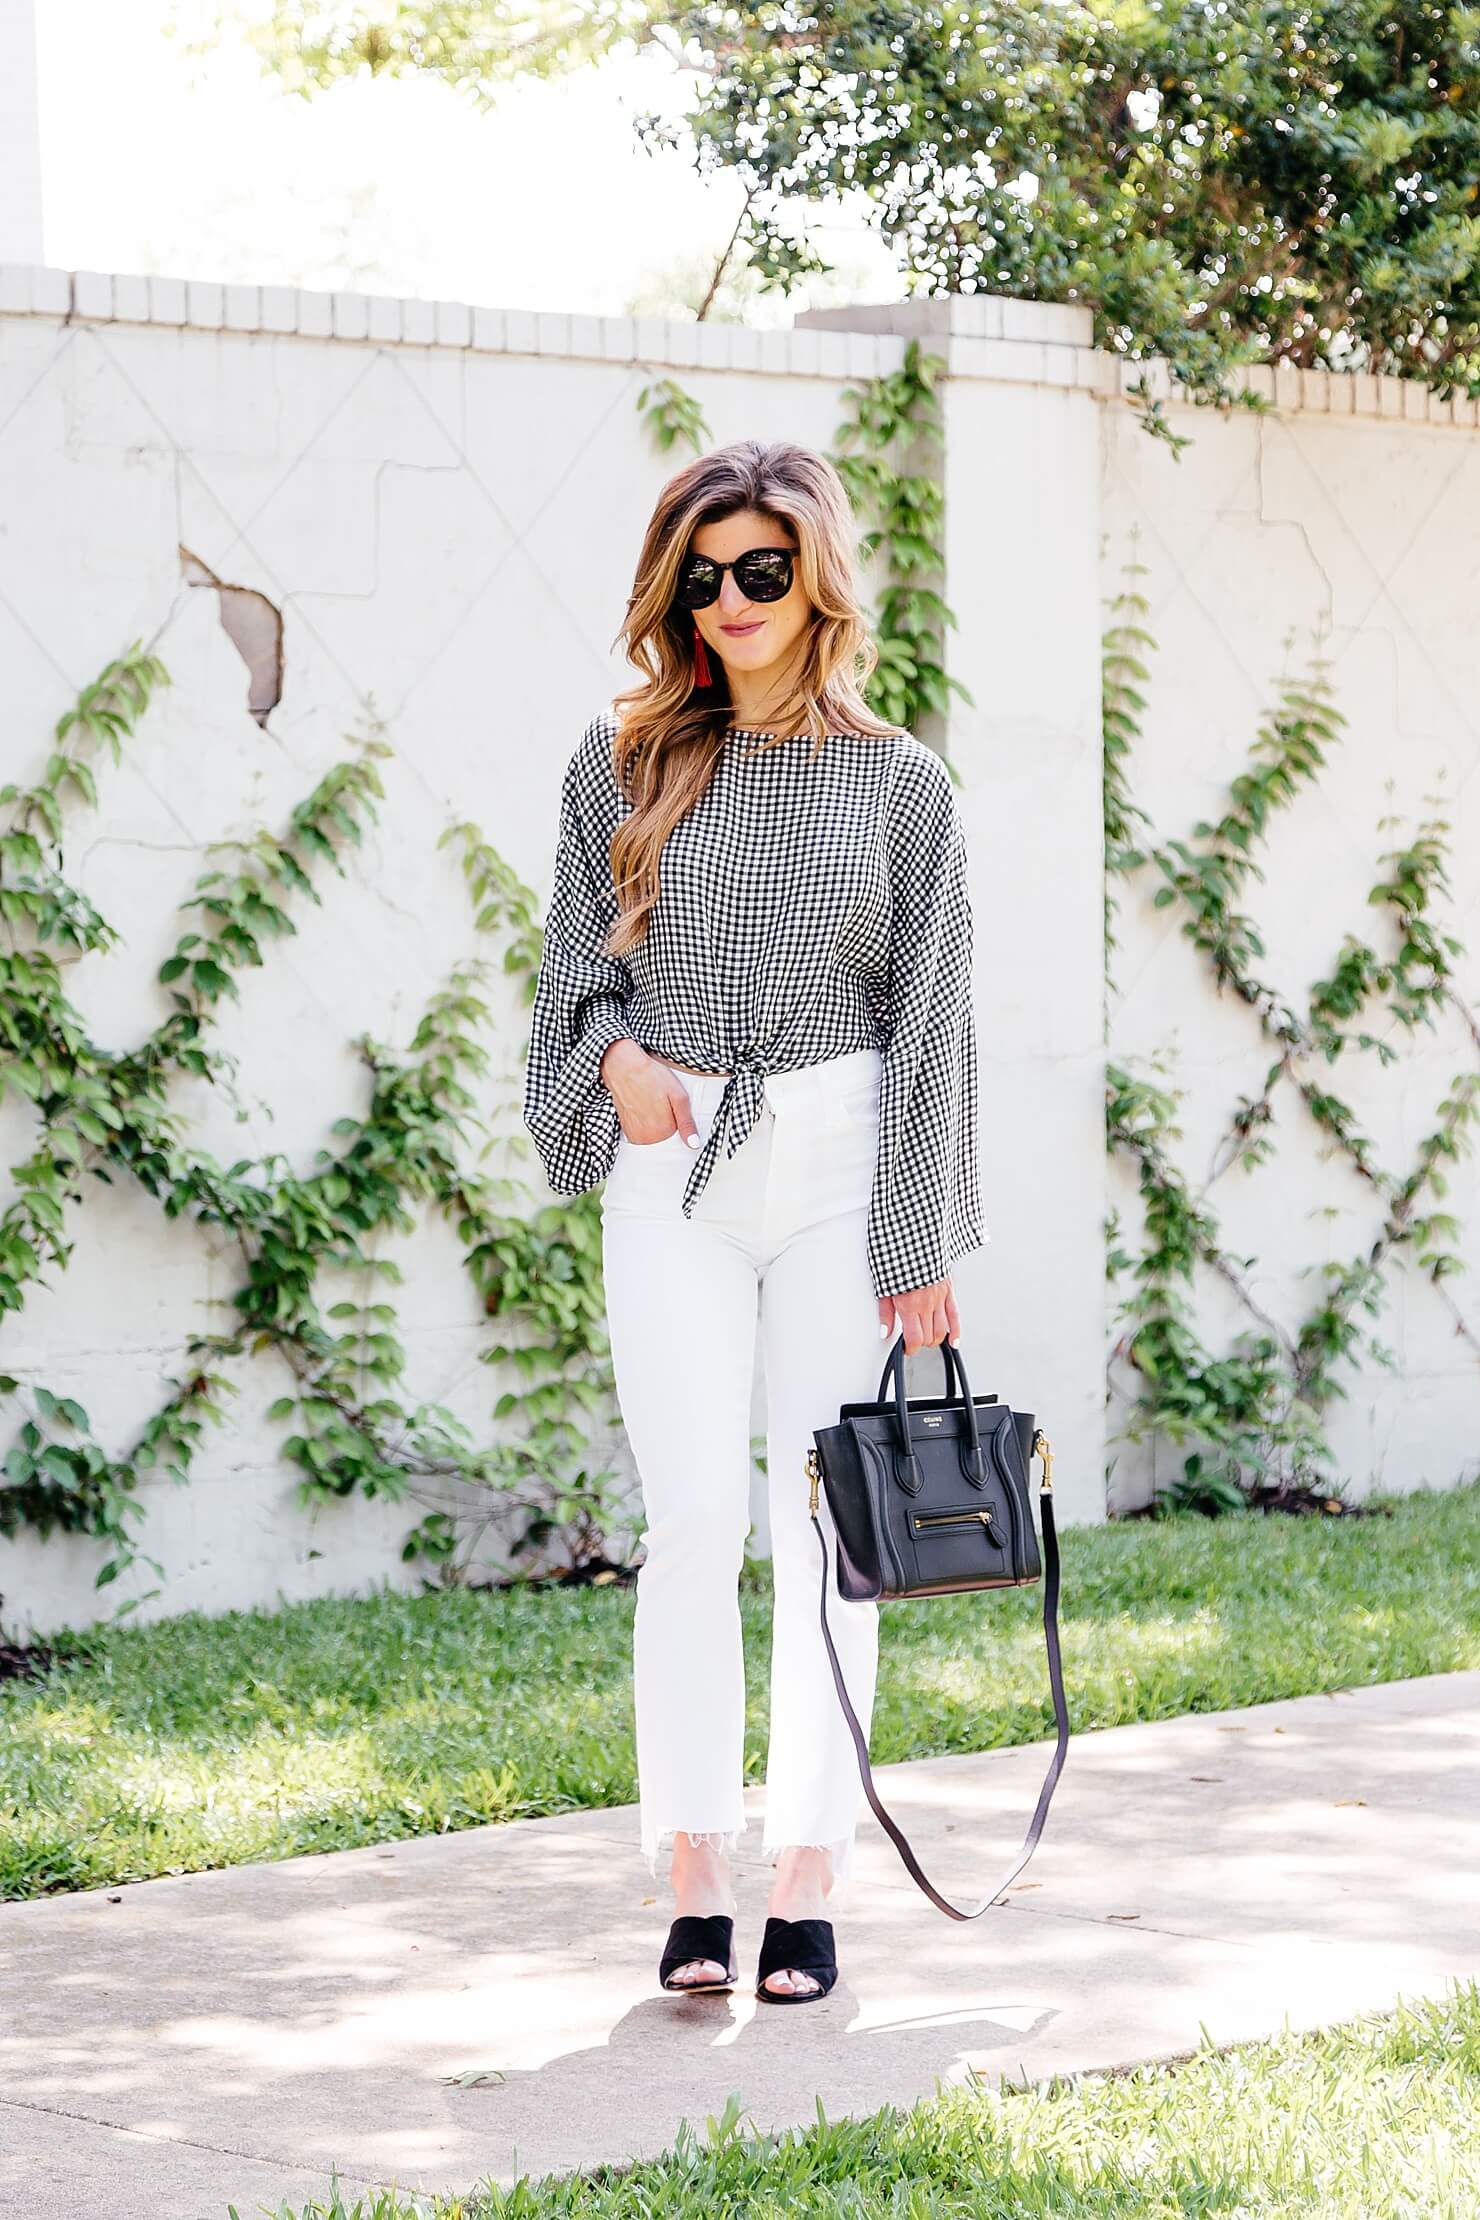 white jeans cropped flare